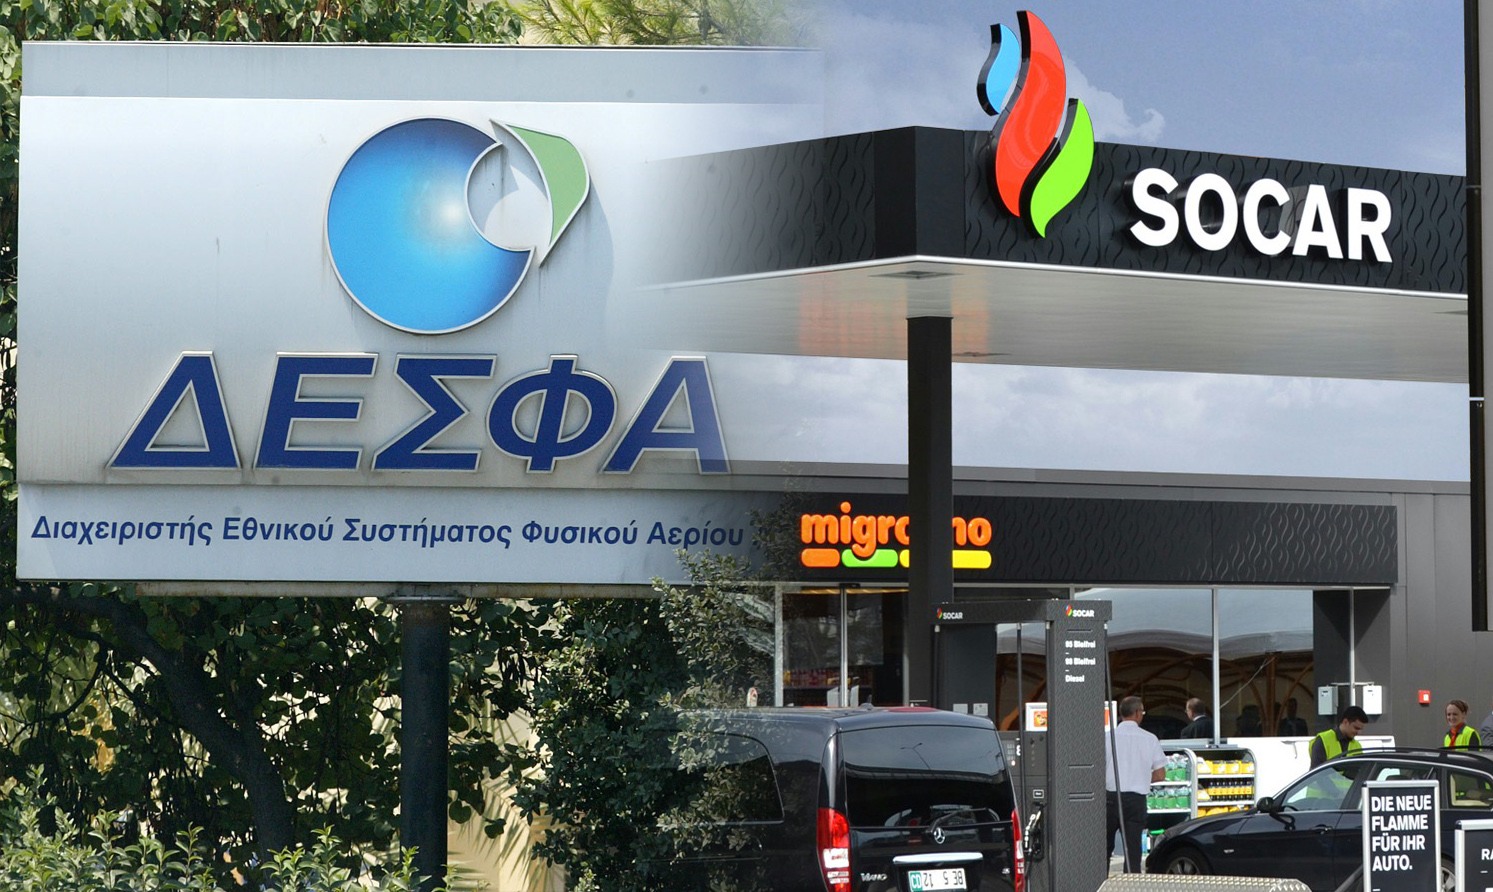 SOCAR expected to purchase DESFA stakes in coming months